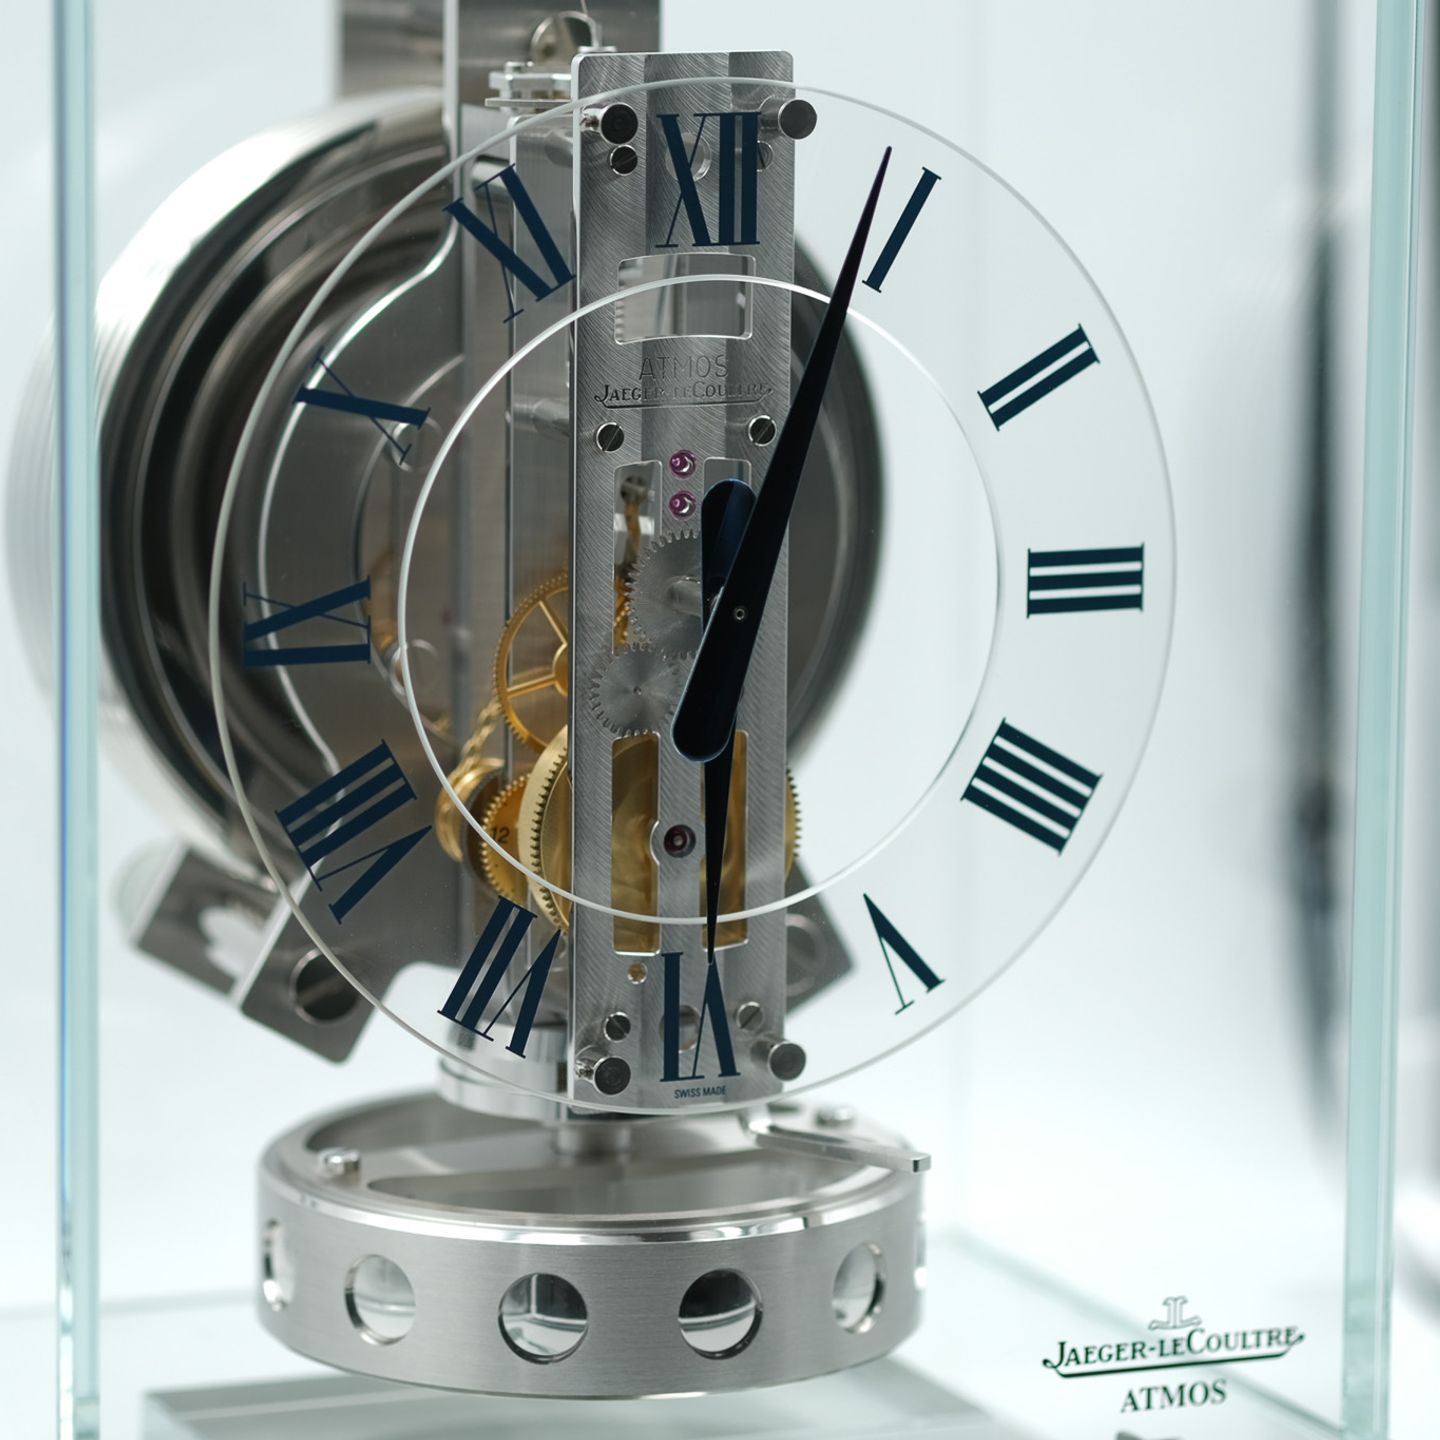 Jaeger-LeCoultre Atmos Q5135201 (Unknown (random serial)) - Transparent dial Unknown Steel case (3/6)